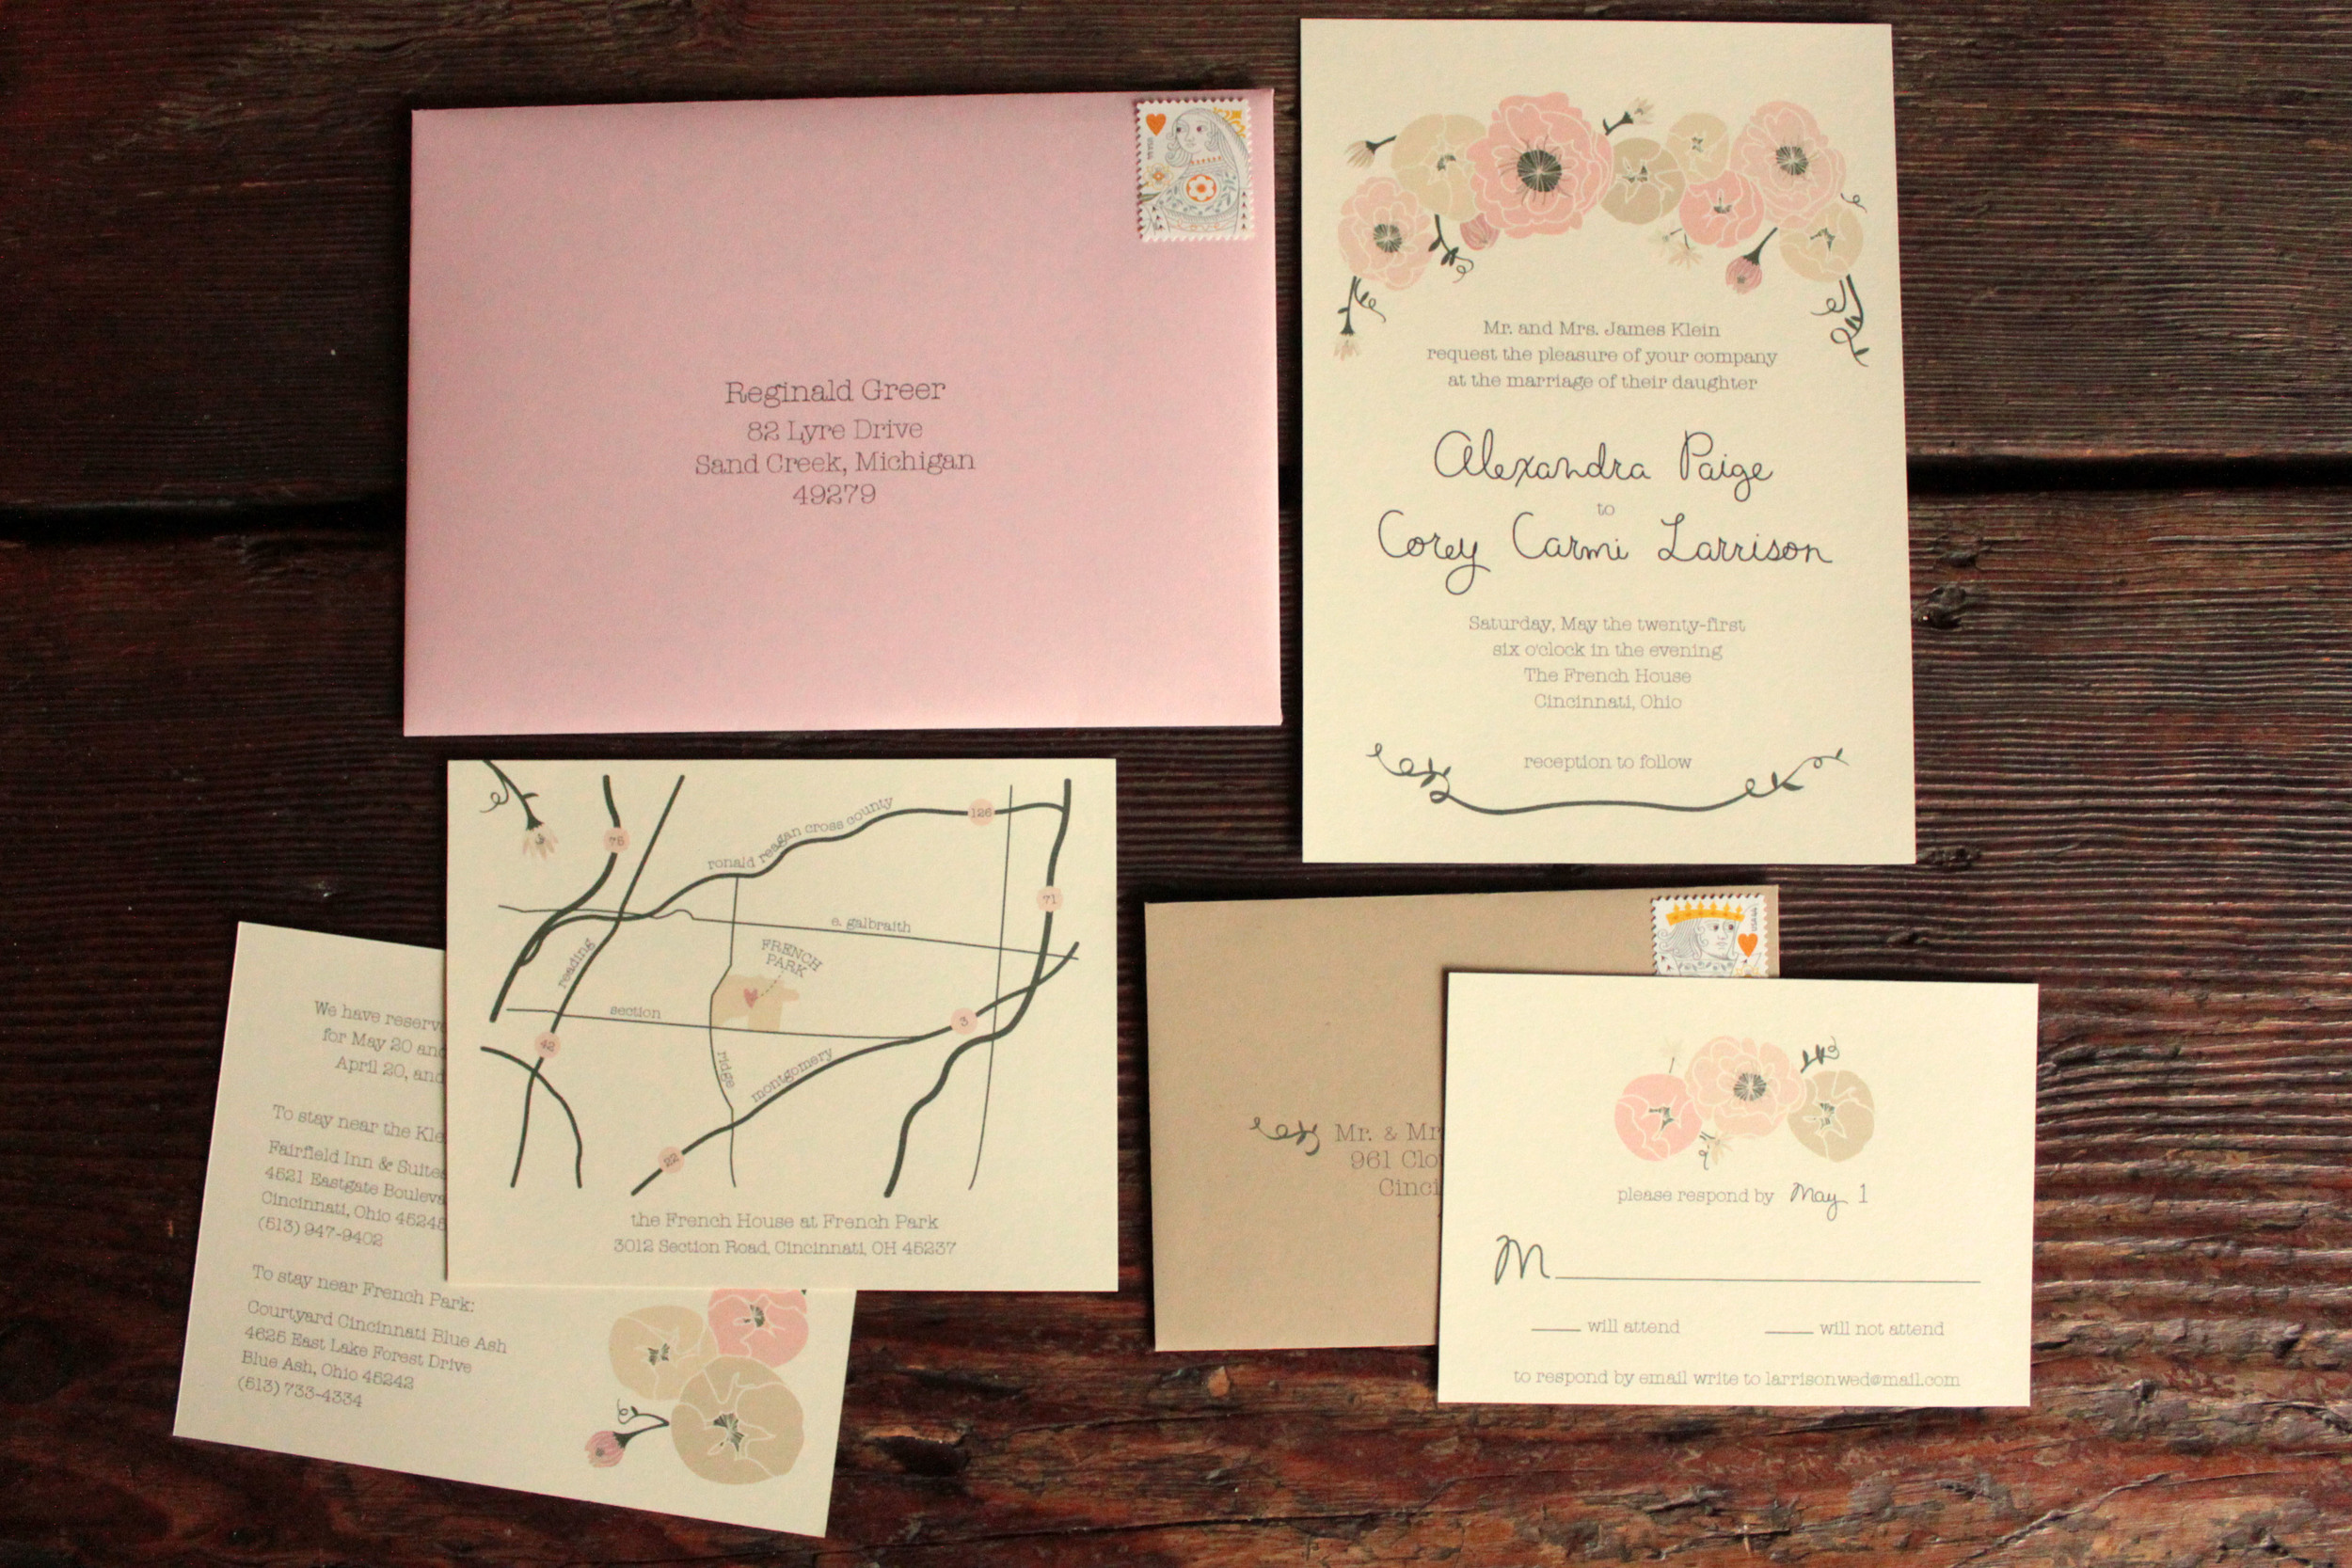  Image of a wedding invitation suite featuring an invite card, information card, and RSVP card 